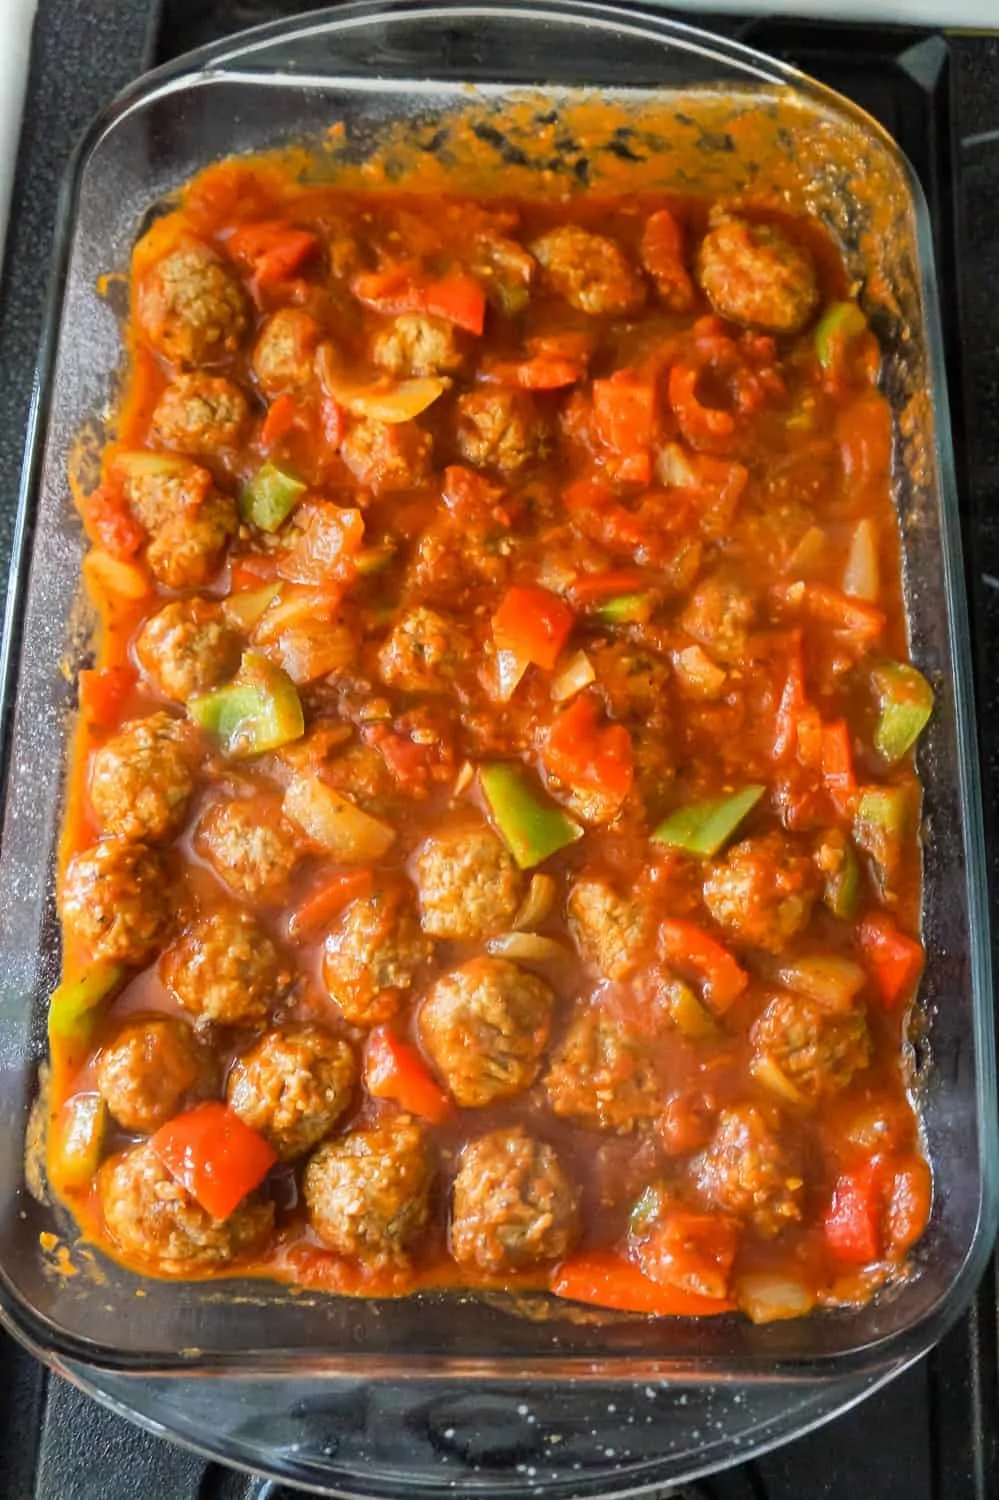 meatballs. marinara and chopped peppers in a baking dish